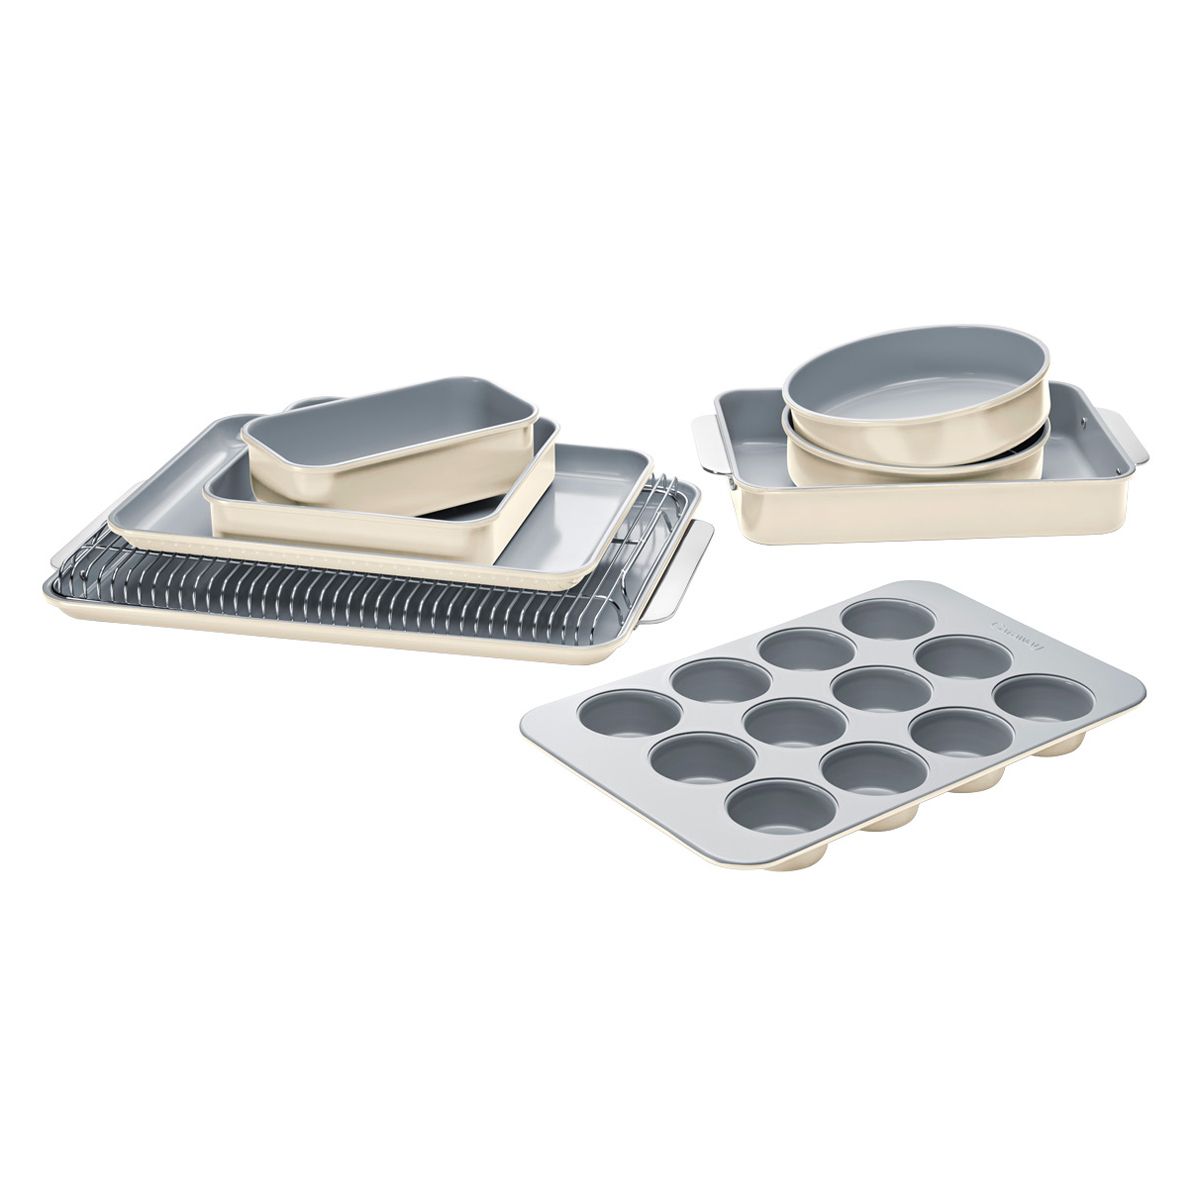 Non-Toxic Non-Stick Caraway Bakeware Cream Set of 11 | The Container Store